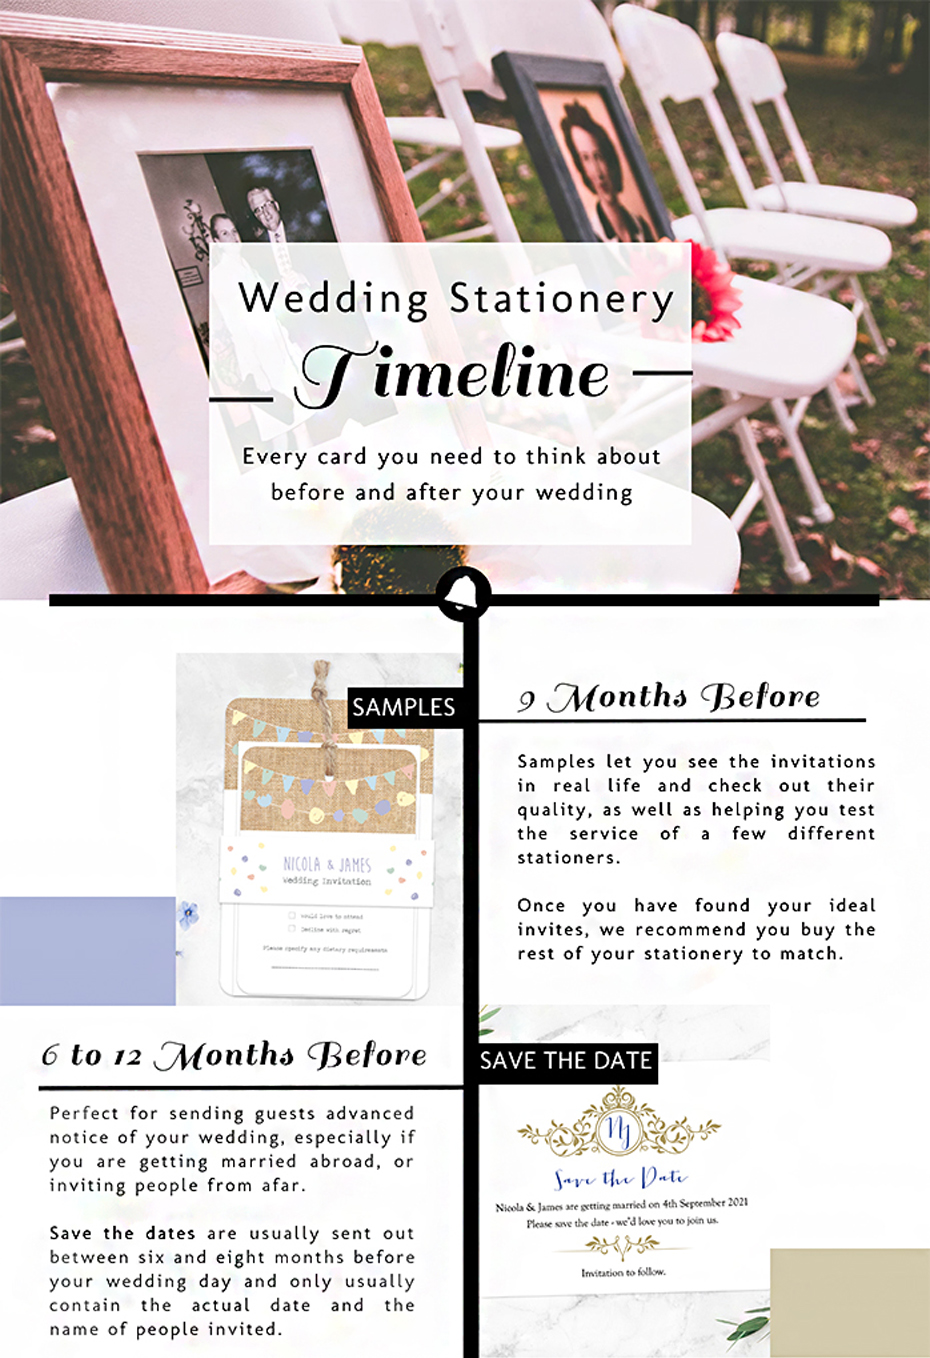 wedding stationery timeline, 9 months before and 6 to 12 months before